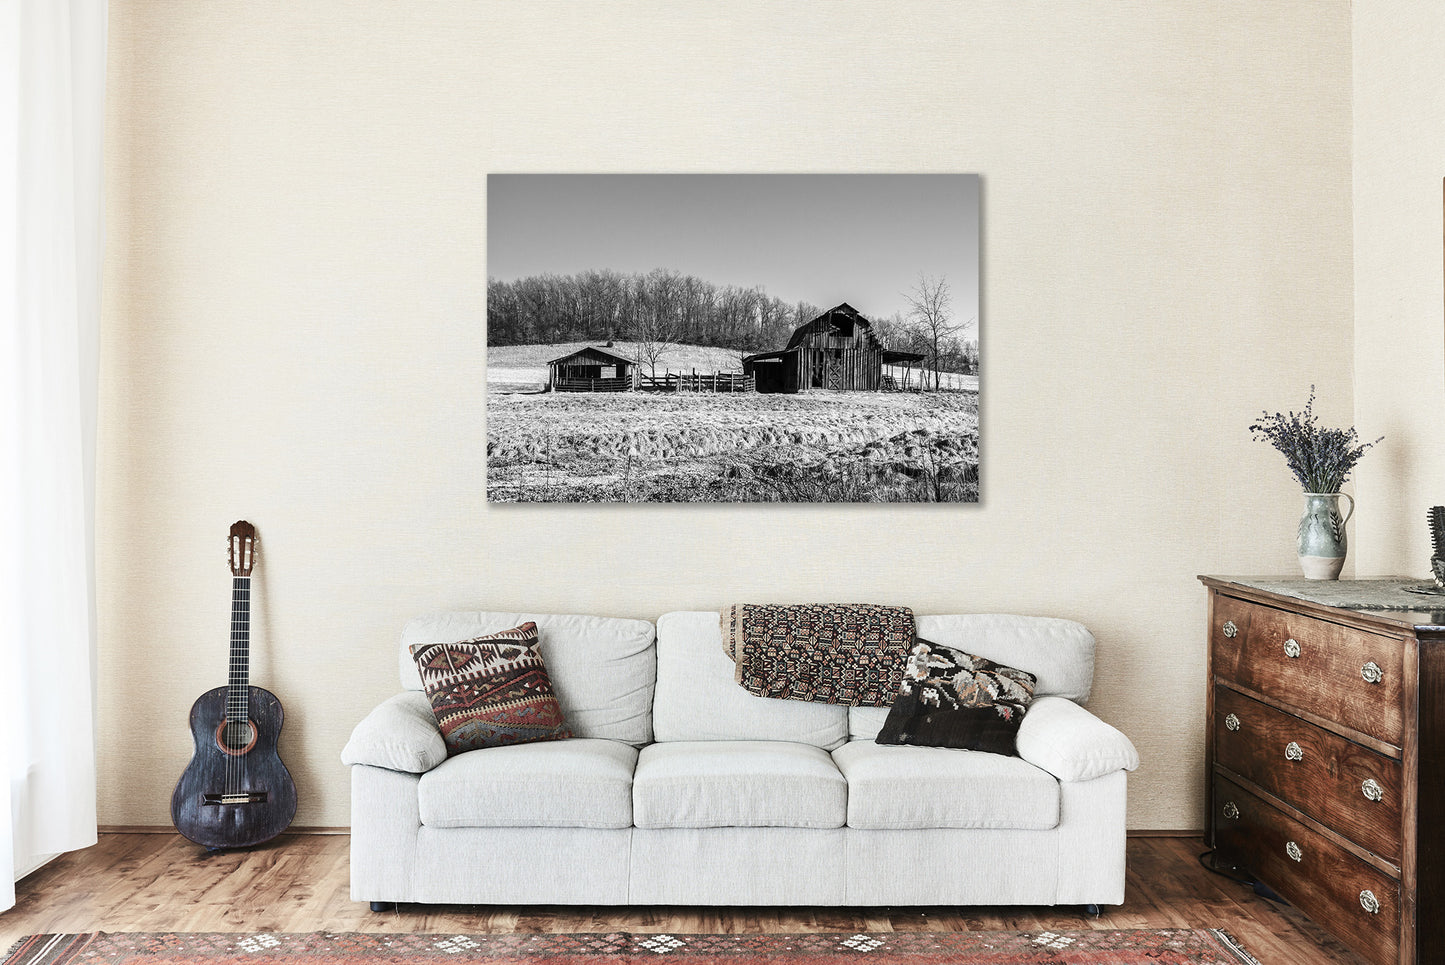 Farmhouse Canvas Wall Art - Black and White Gallery Wrap of Rustic Barn and Pen in Arkansas - Country Farm Photography Artwork Decor